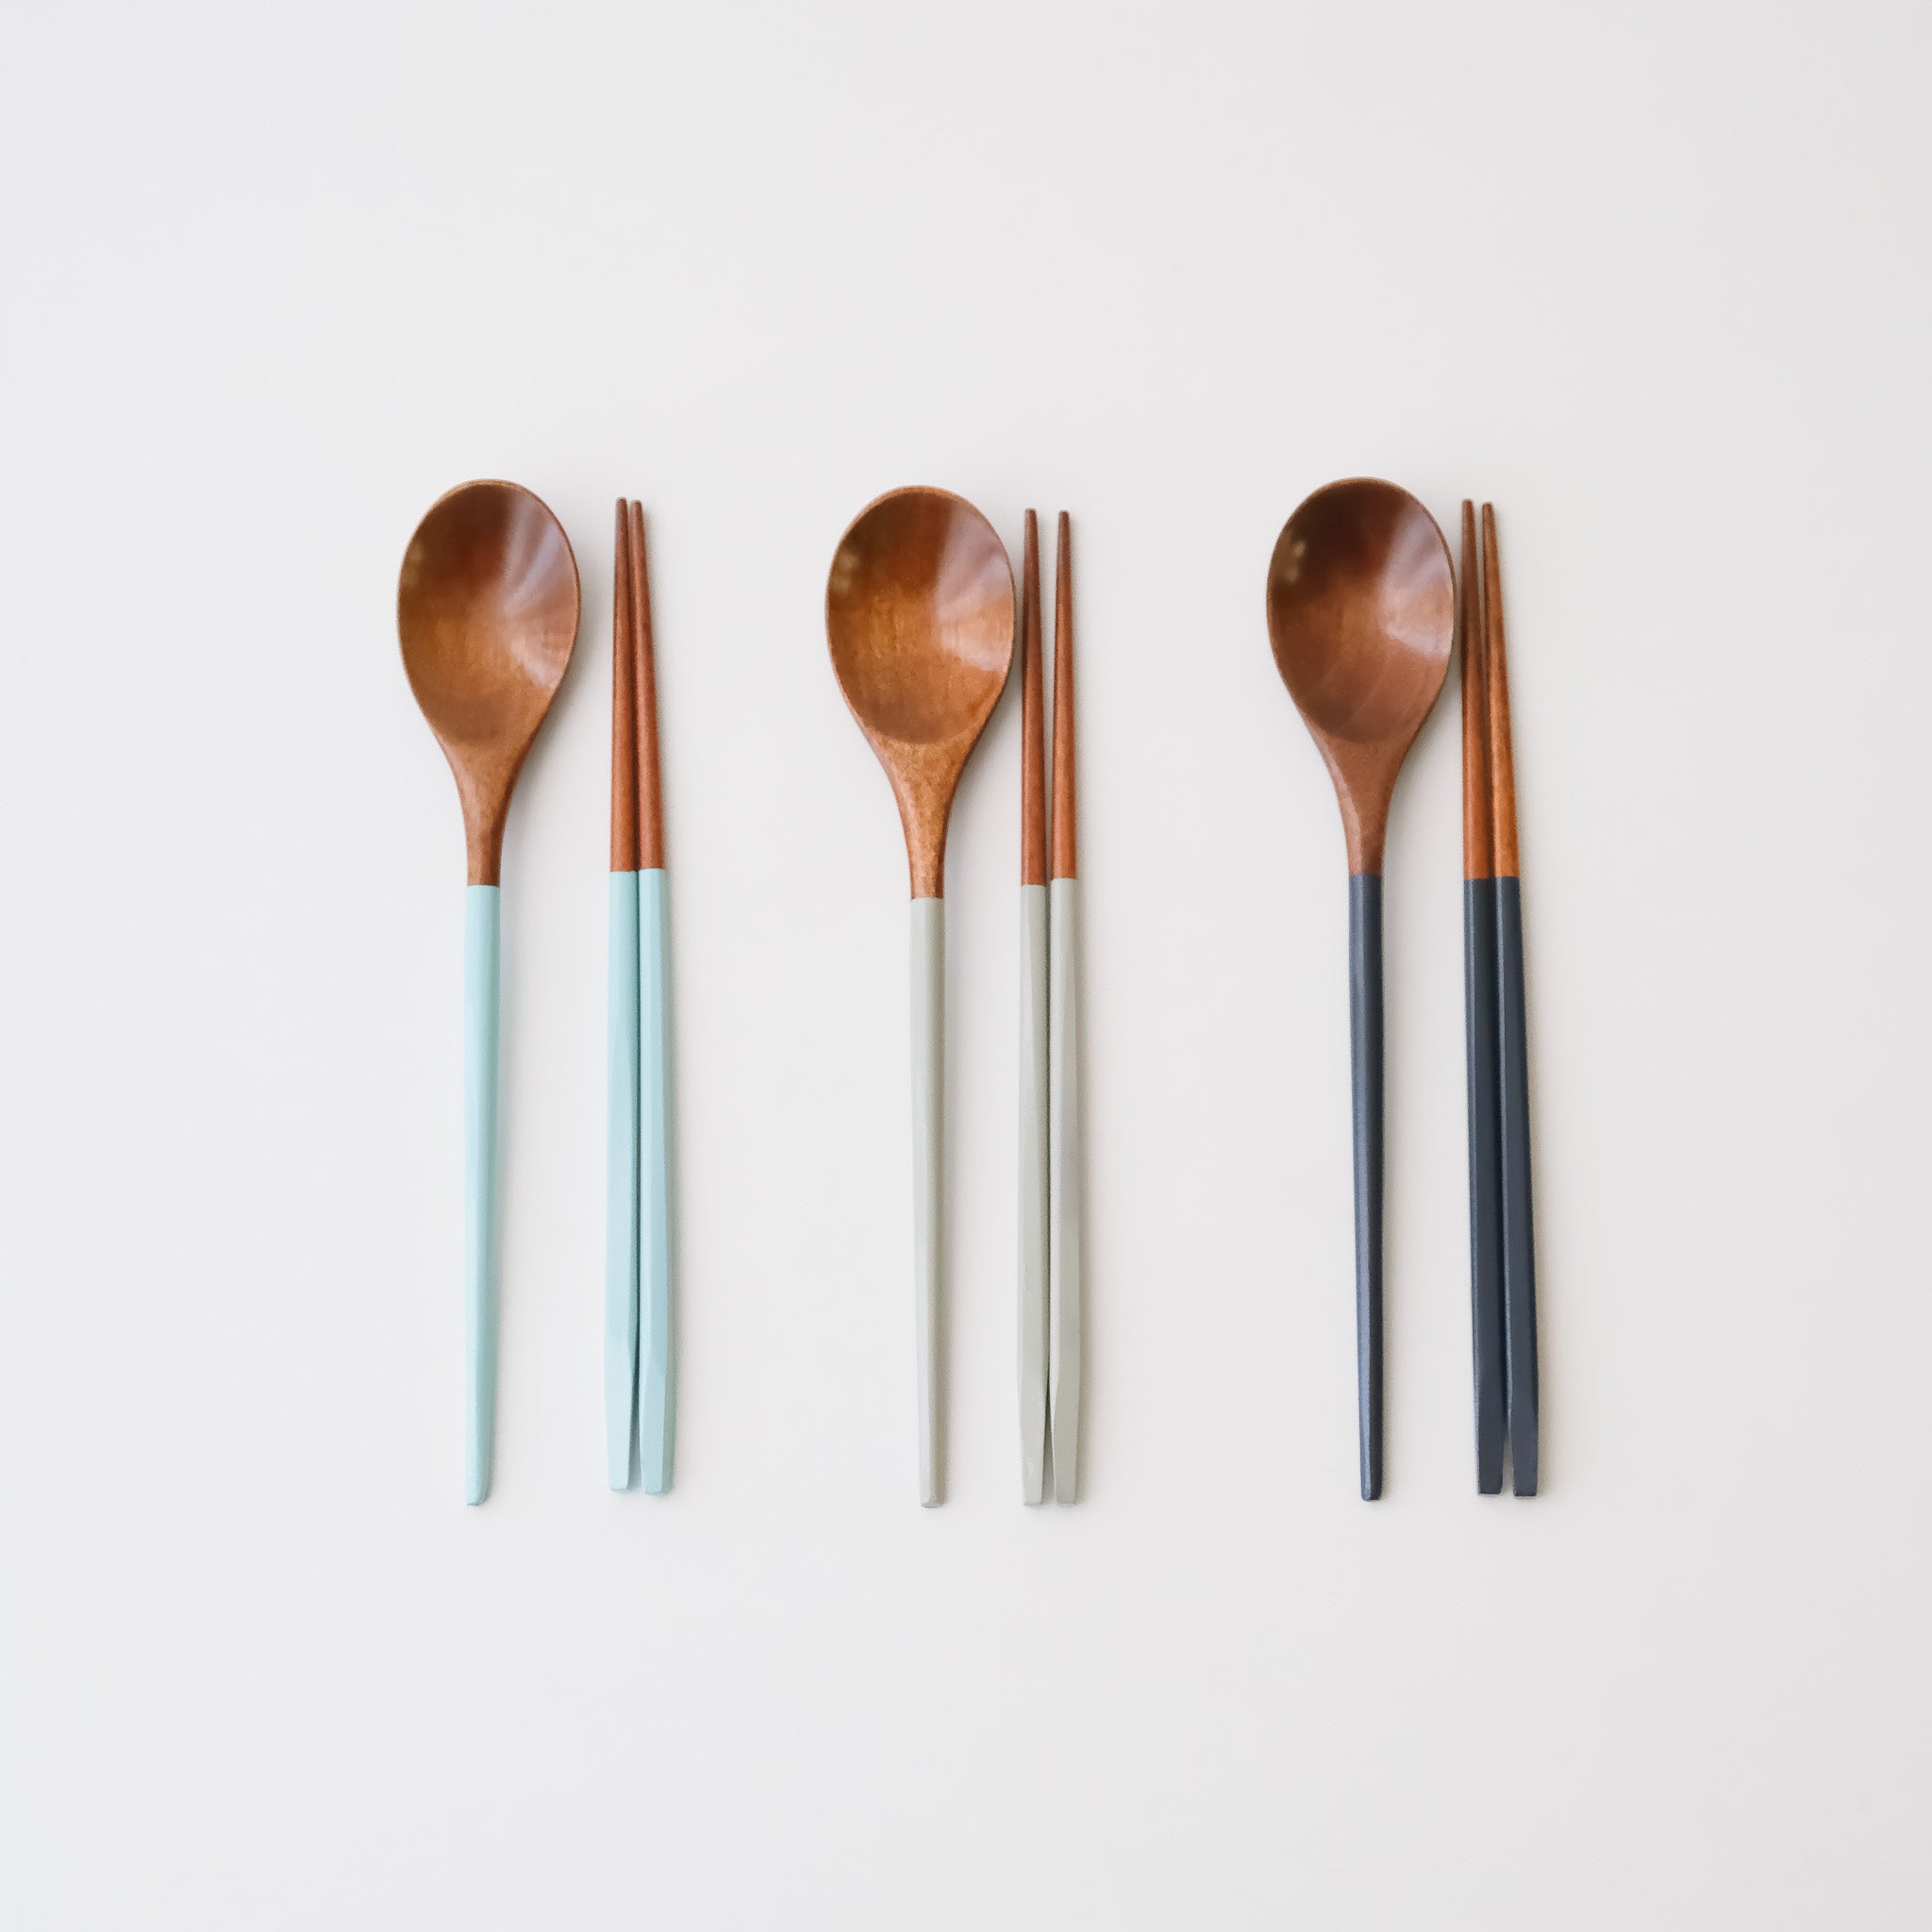 Karree Wooden Spoon and Chopsticks (3 Colors)